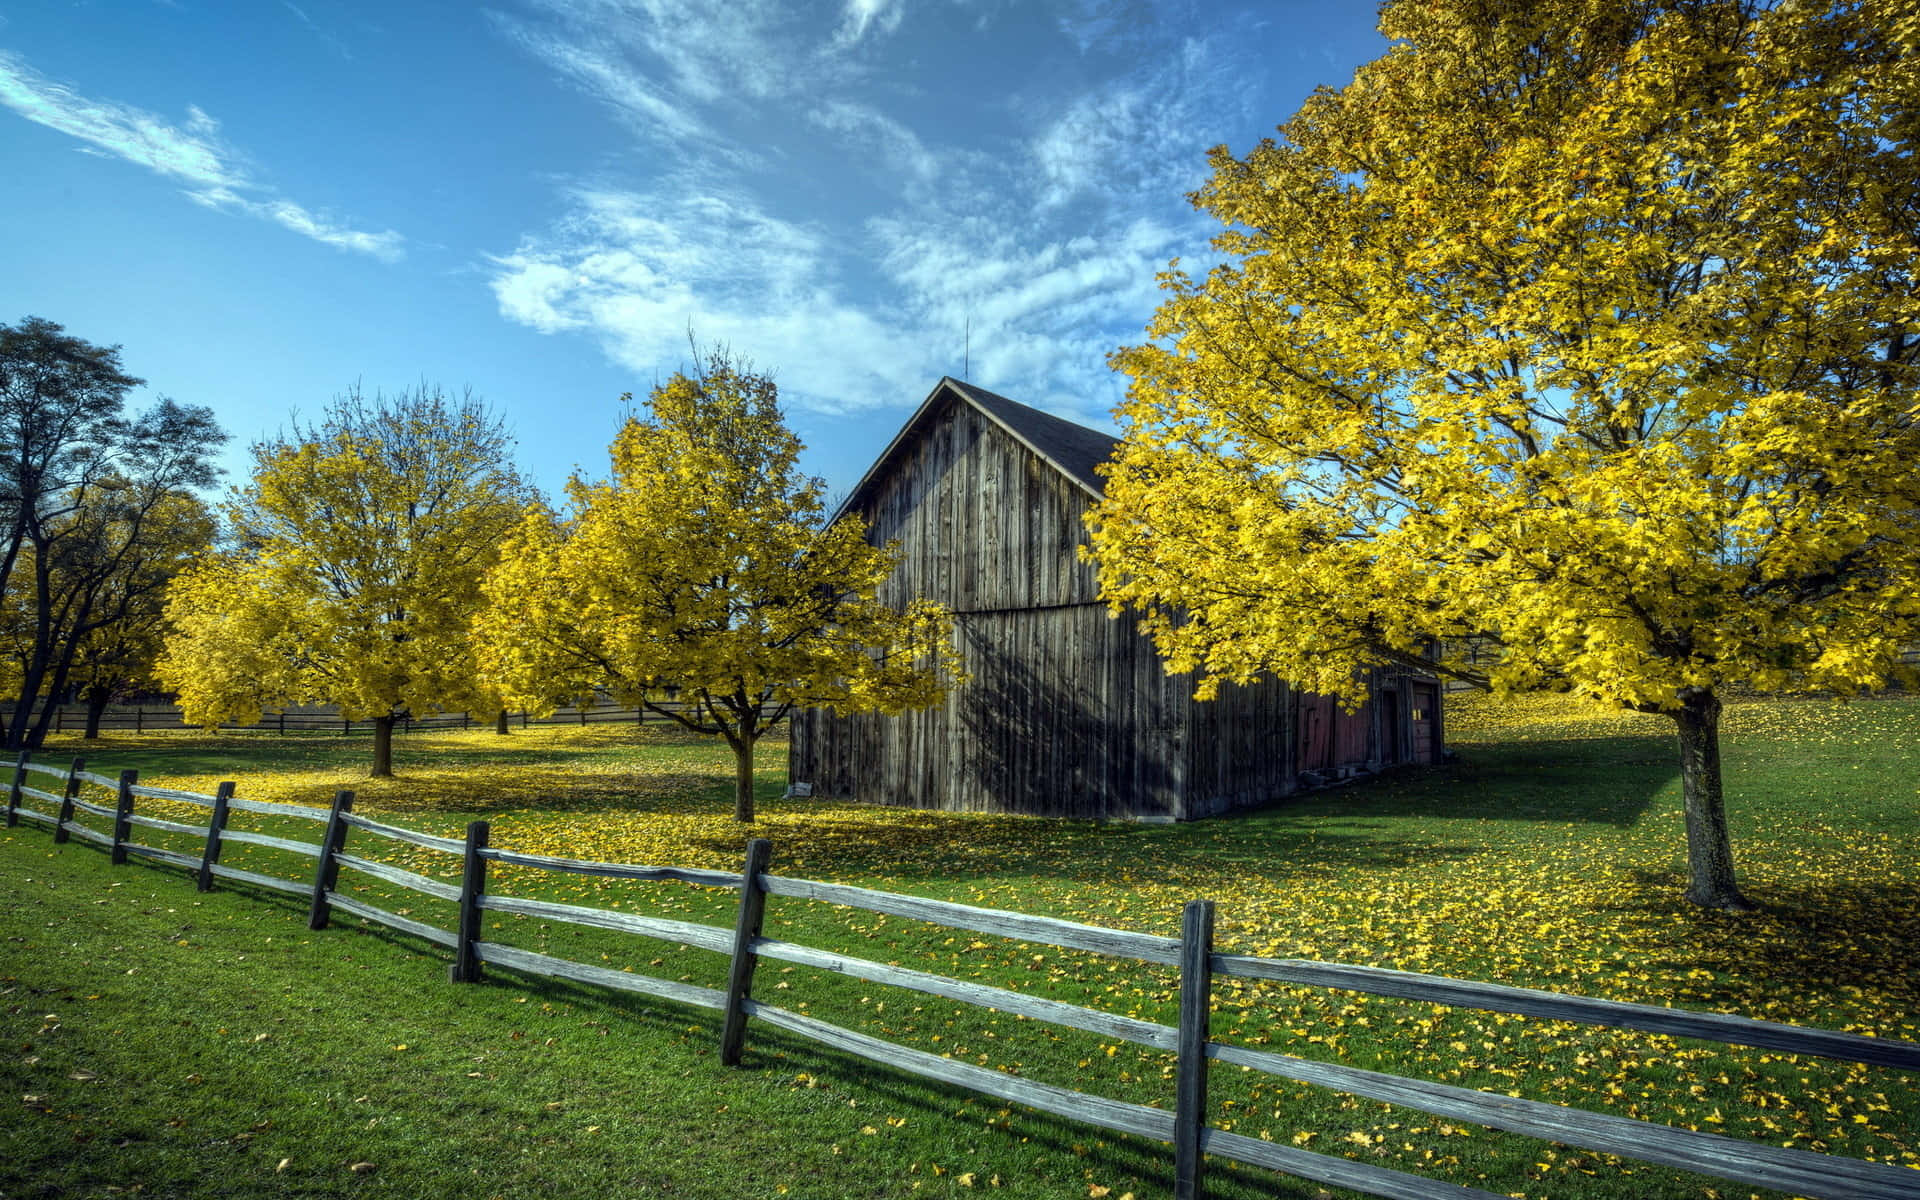 "The beauty of a wooden barn on a picturesque farm."